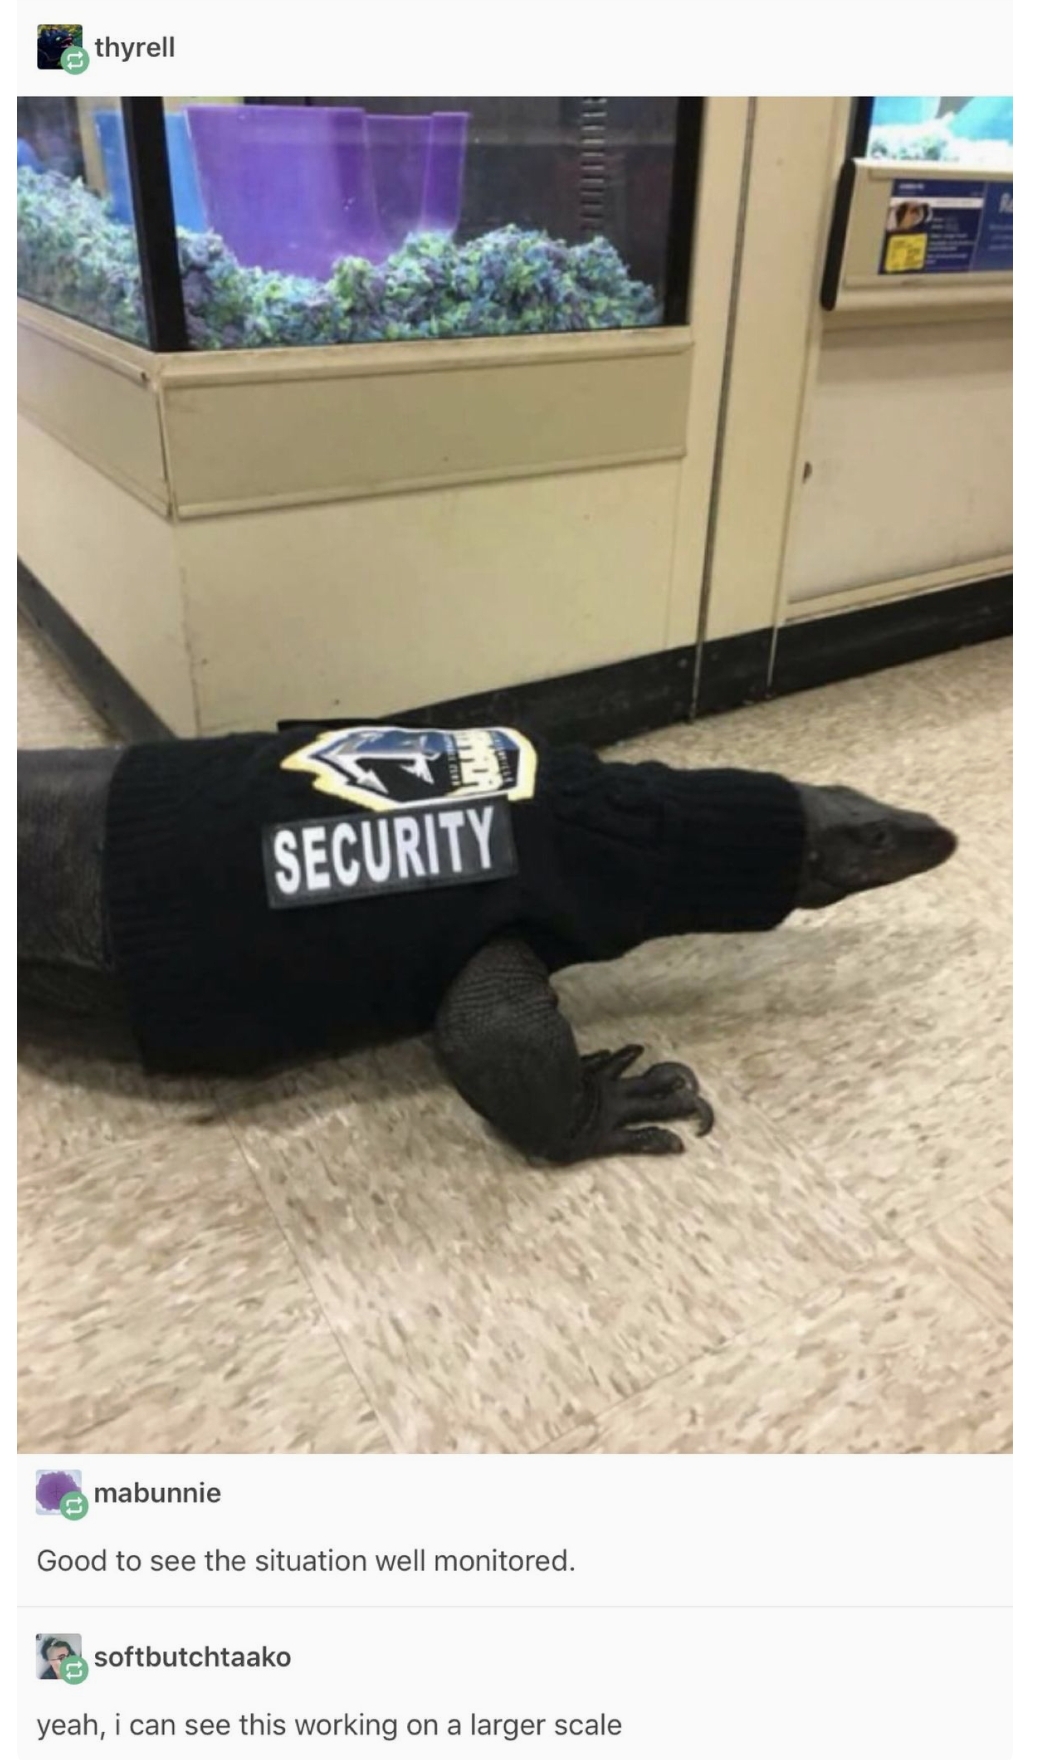 memes - komodo dragon security guard - thyrell Security mabunnie Good to see the situation wel monitored softbutchtaako yeah, i can see this working on a larger scale